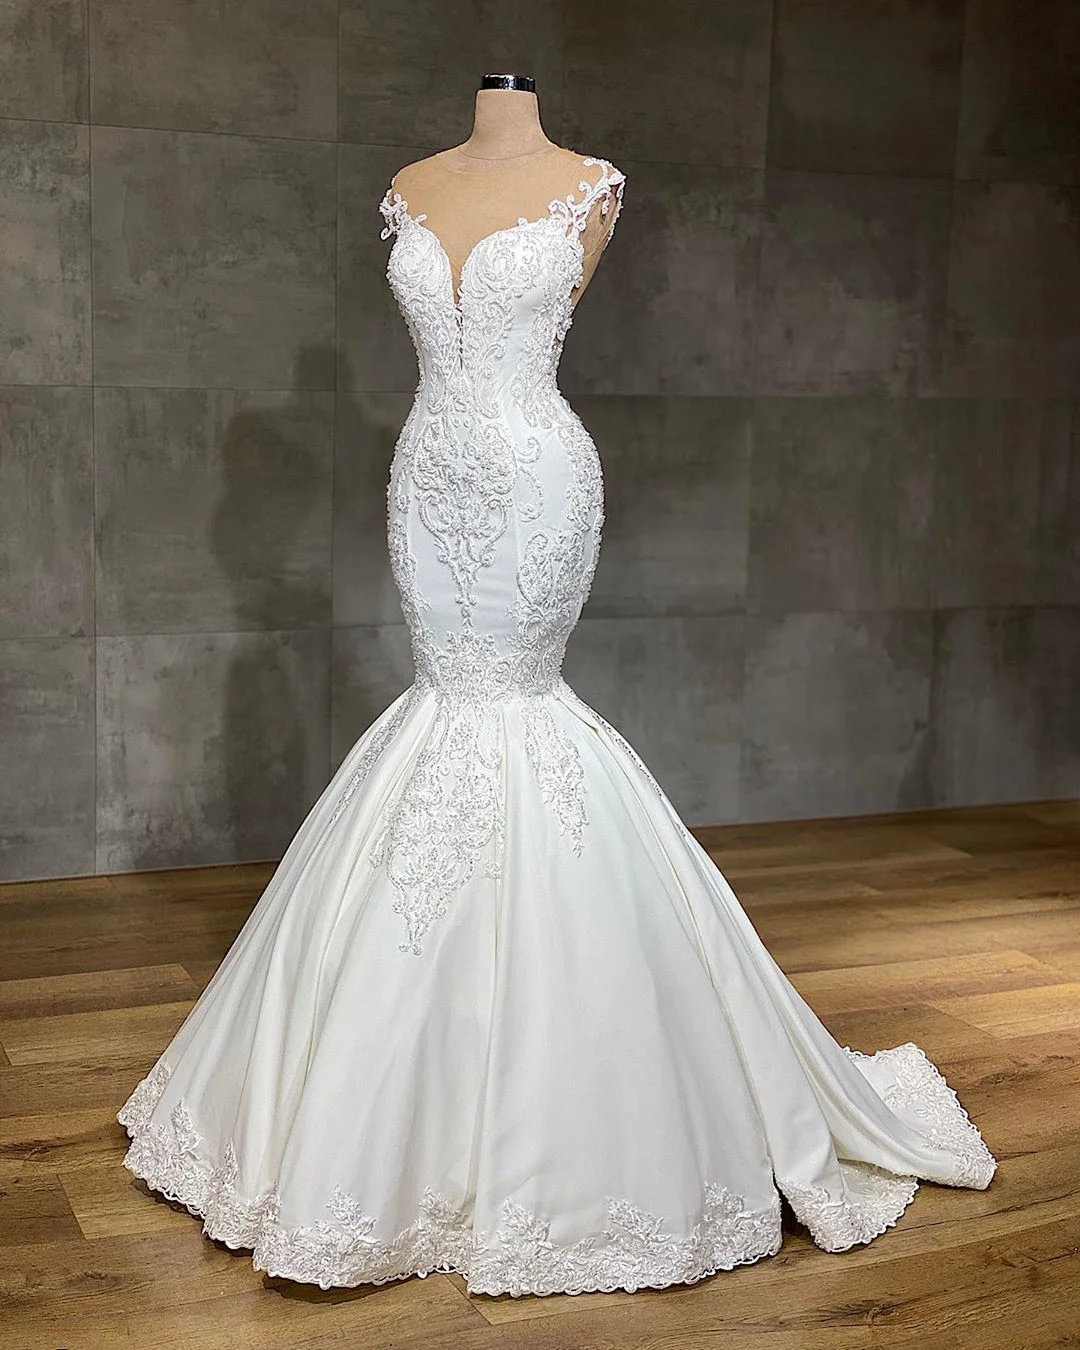 Bellasprom Modest Lace Sleeveless Mermaid Wedding Dress With Appliques V-Neck